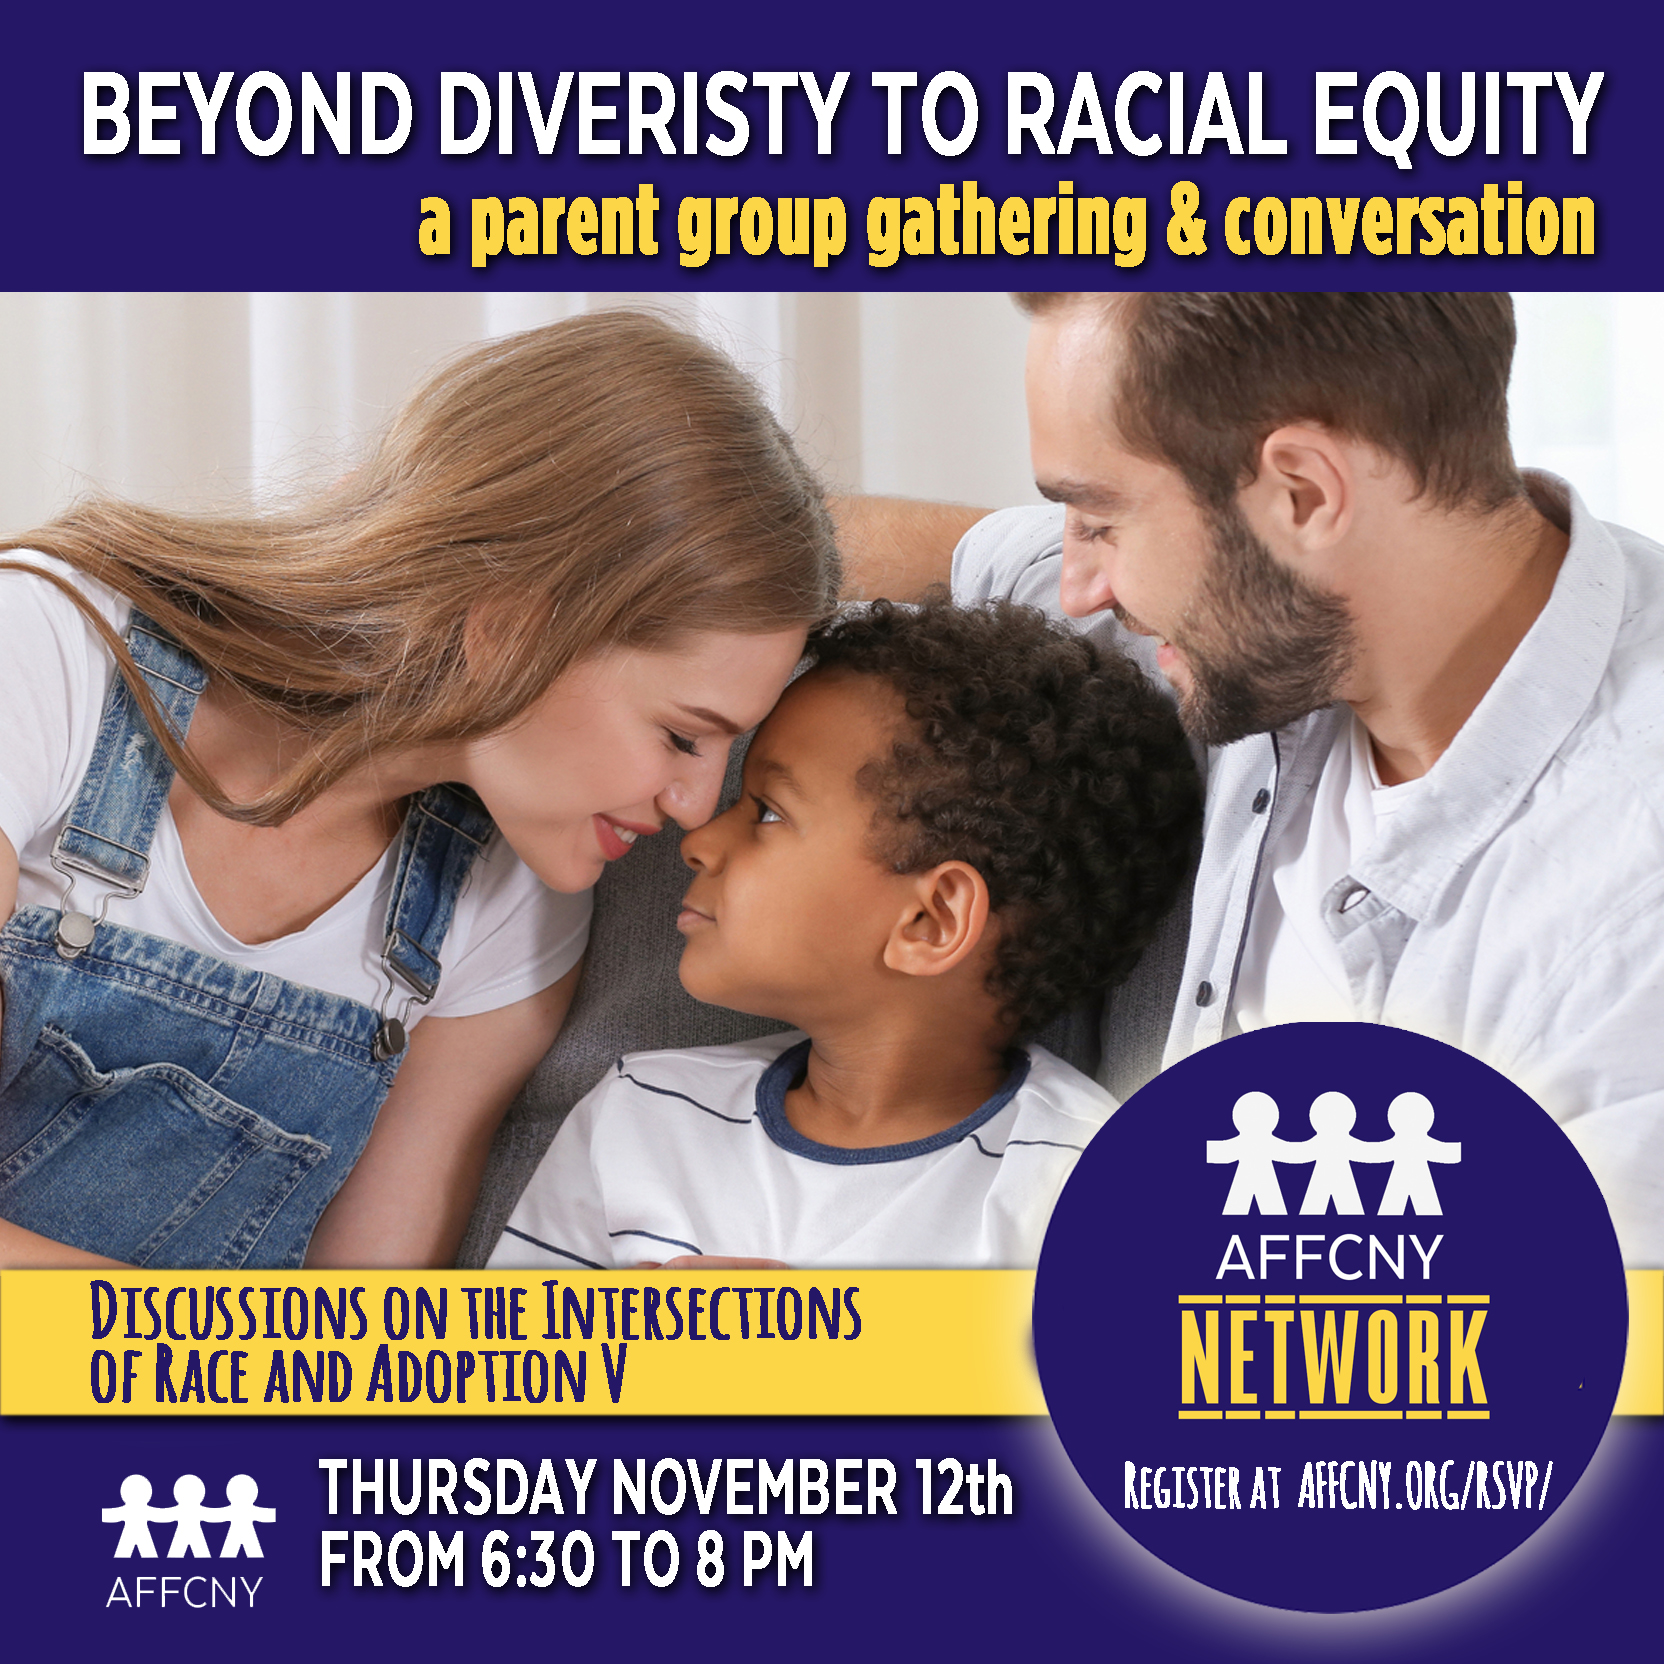 MOVING BEYOND DIVERISTY TO RACIAL EQUITY